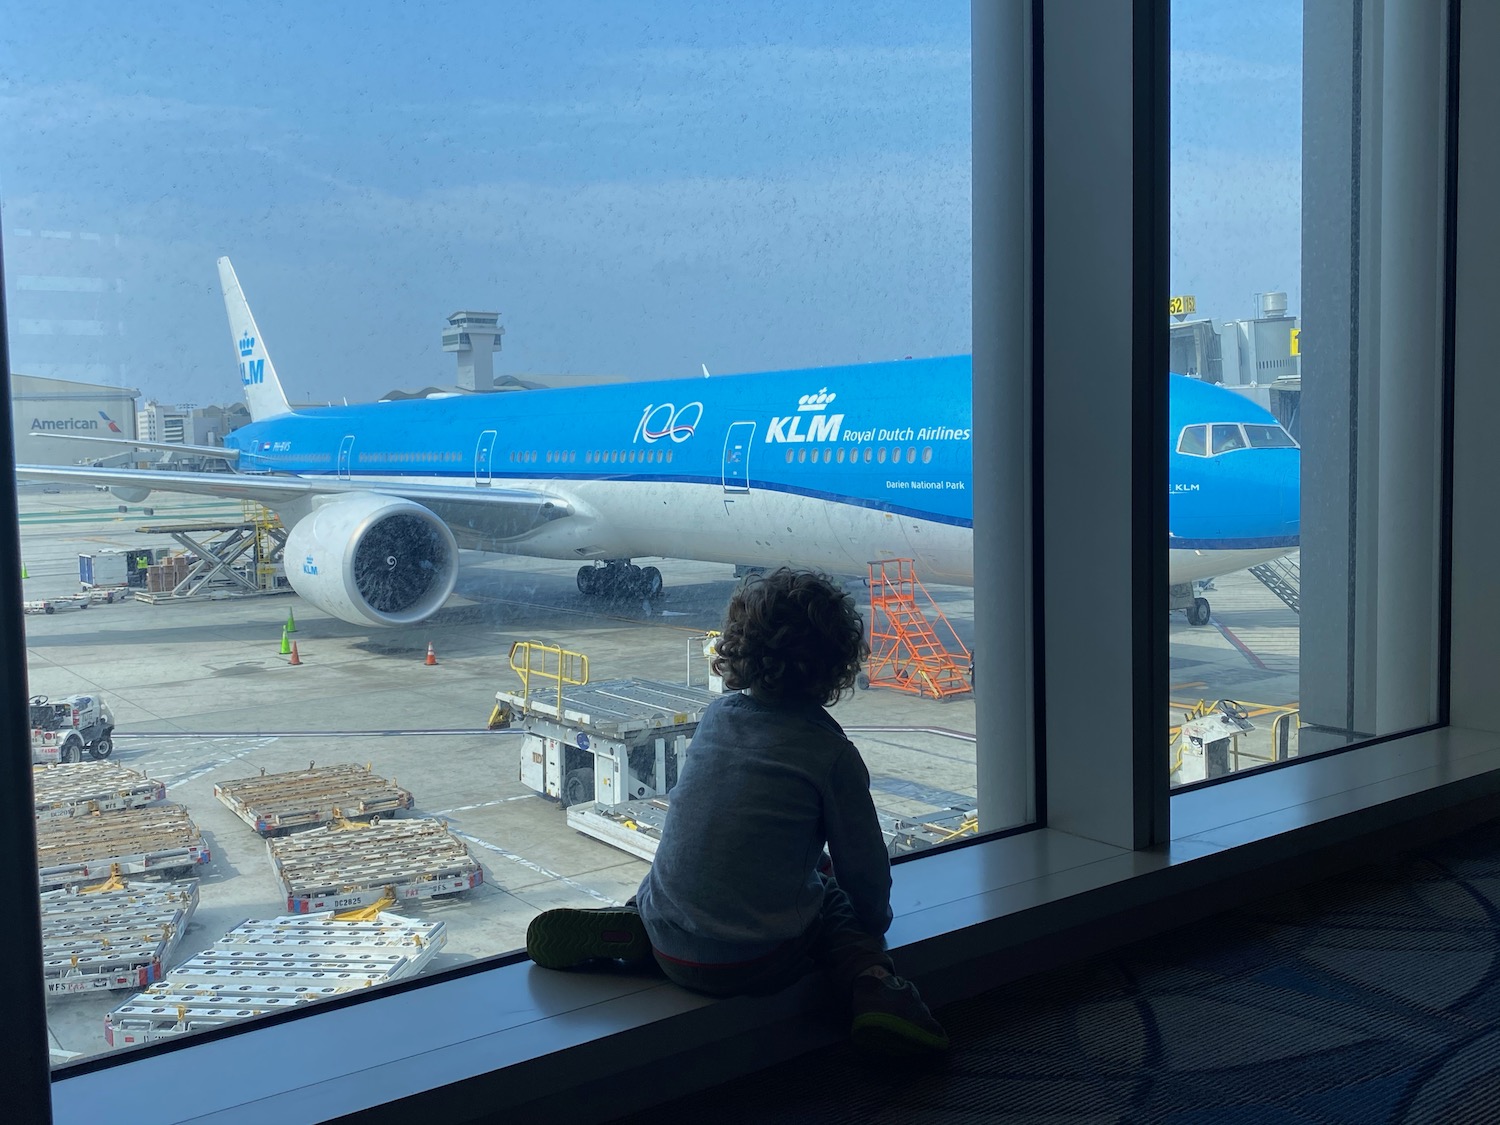 a child sitting on a window sill looking at an airplane